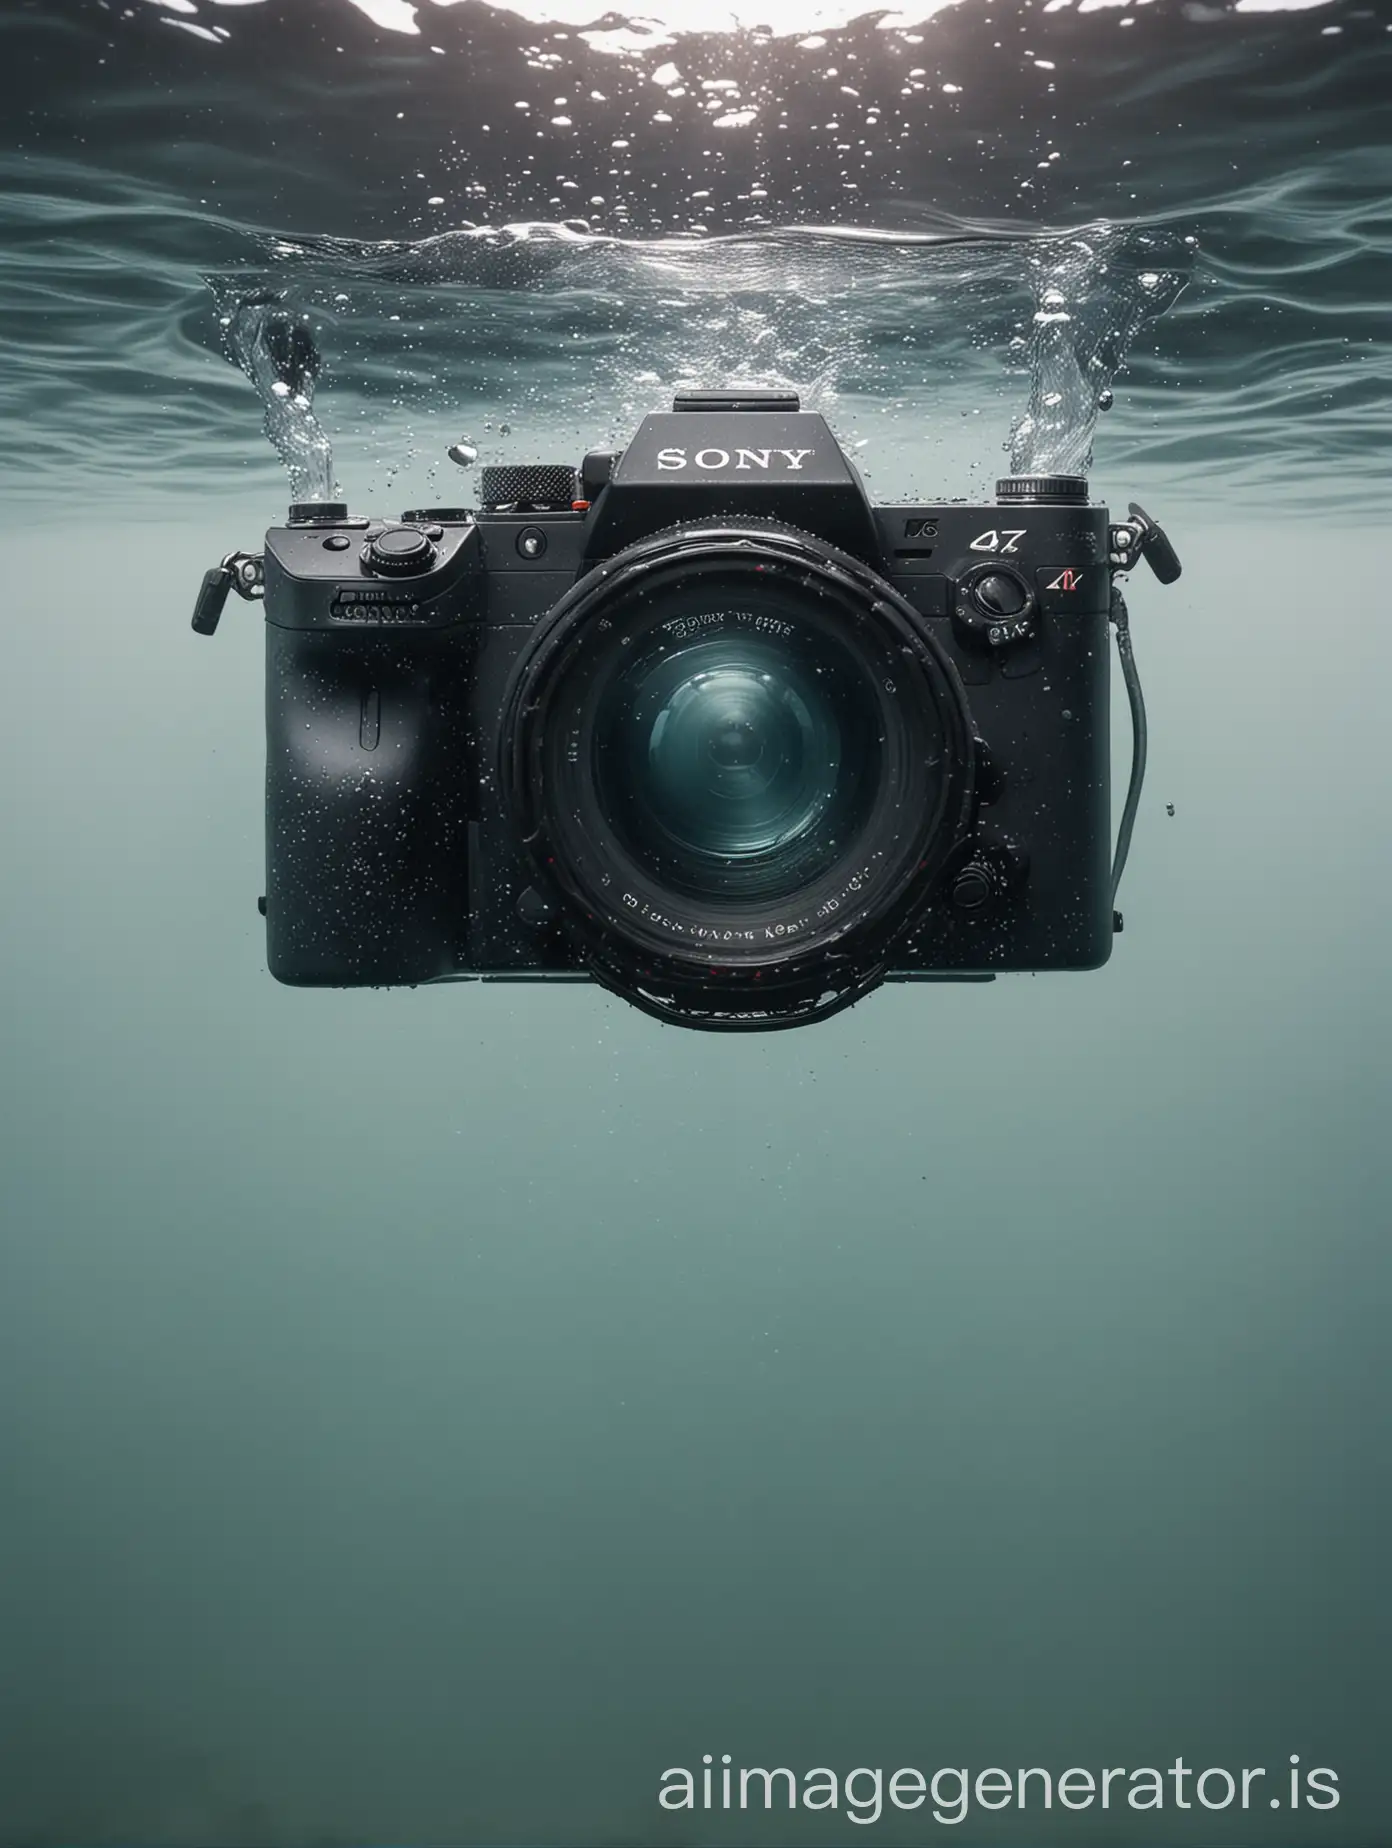 realistic under water, camera half in sea water, a Sony camera mirrorless Alpha 7 s mark 2, neutral background